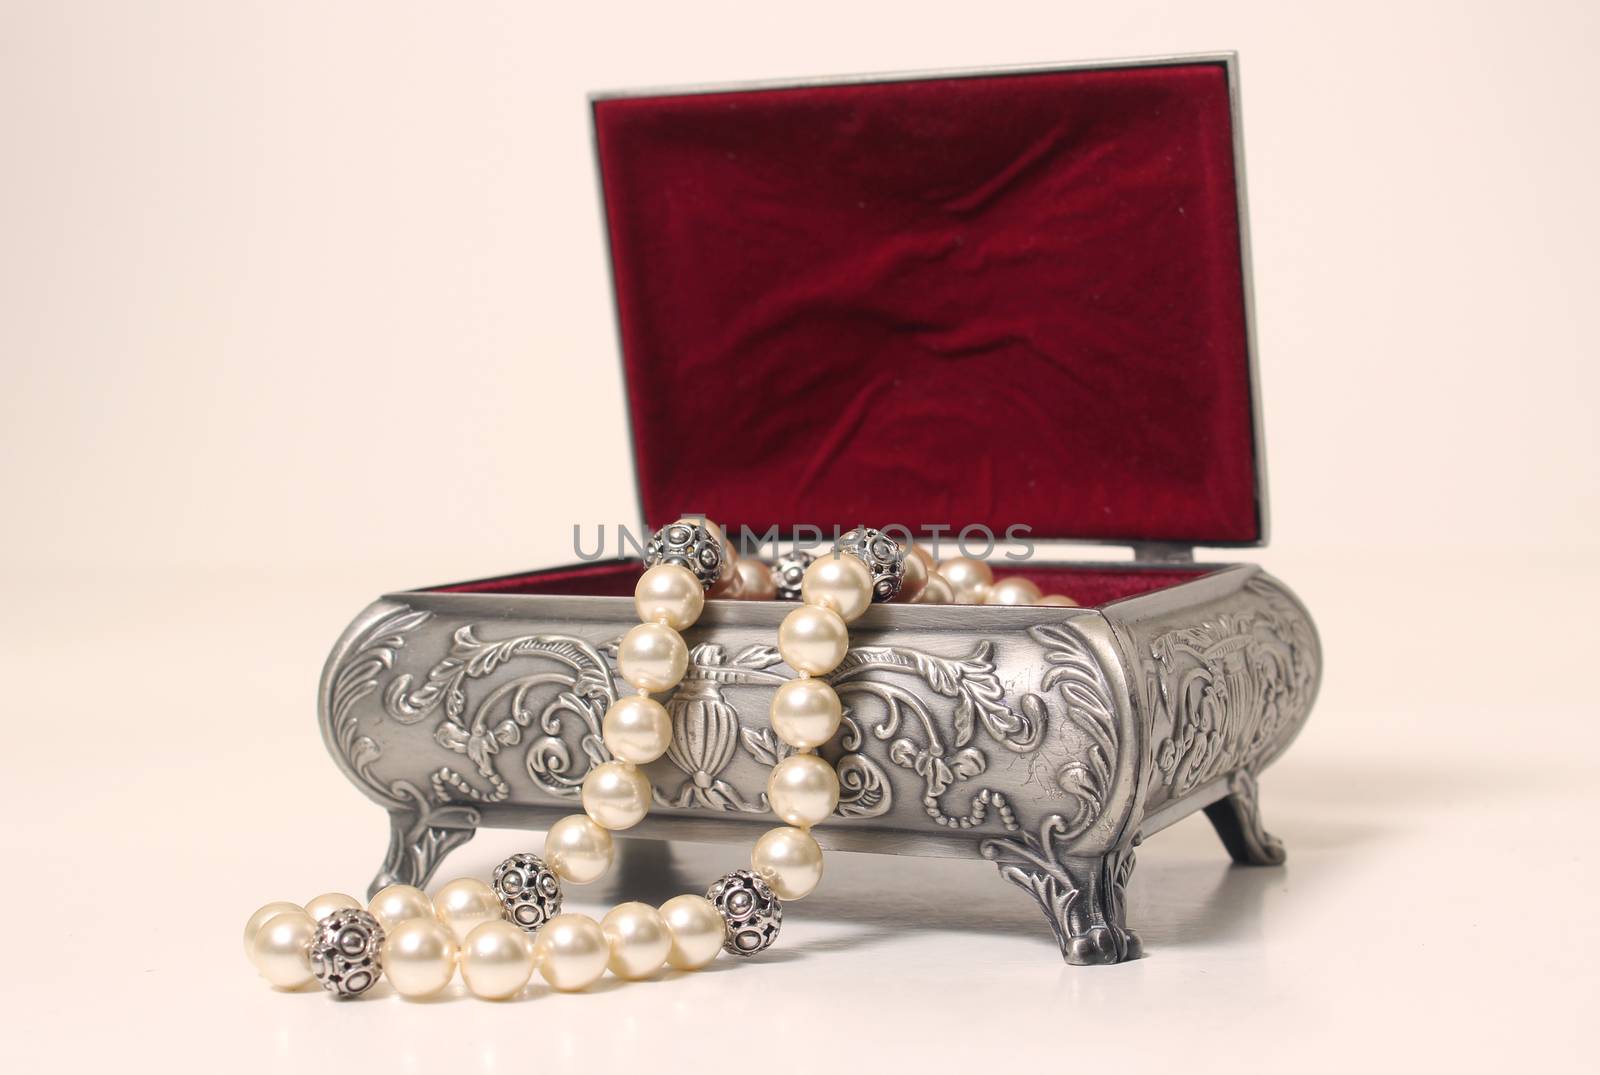 Jewelry Box With Pearl Necklace on light background by Marti157900